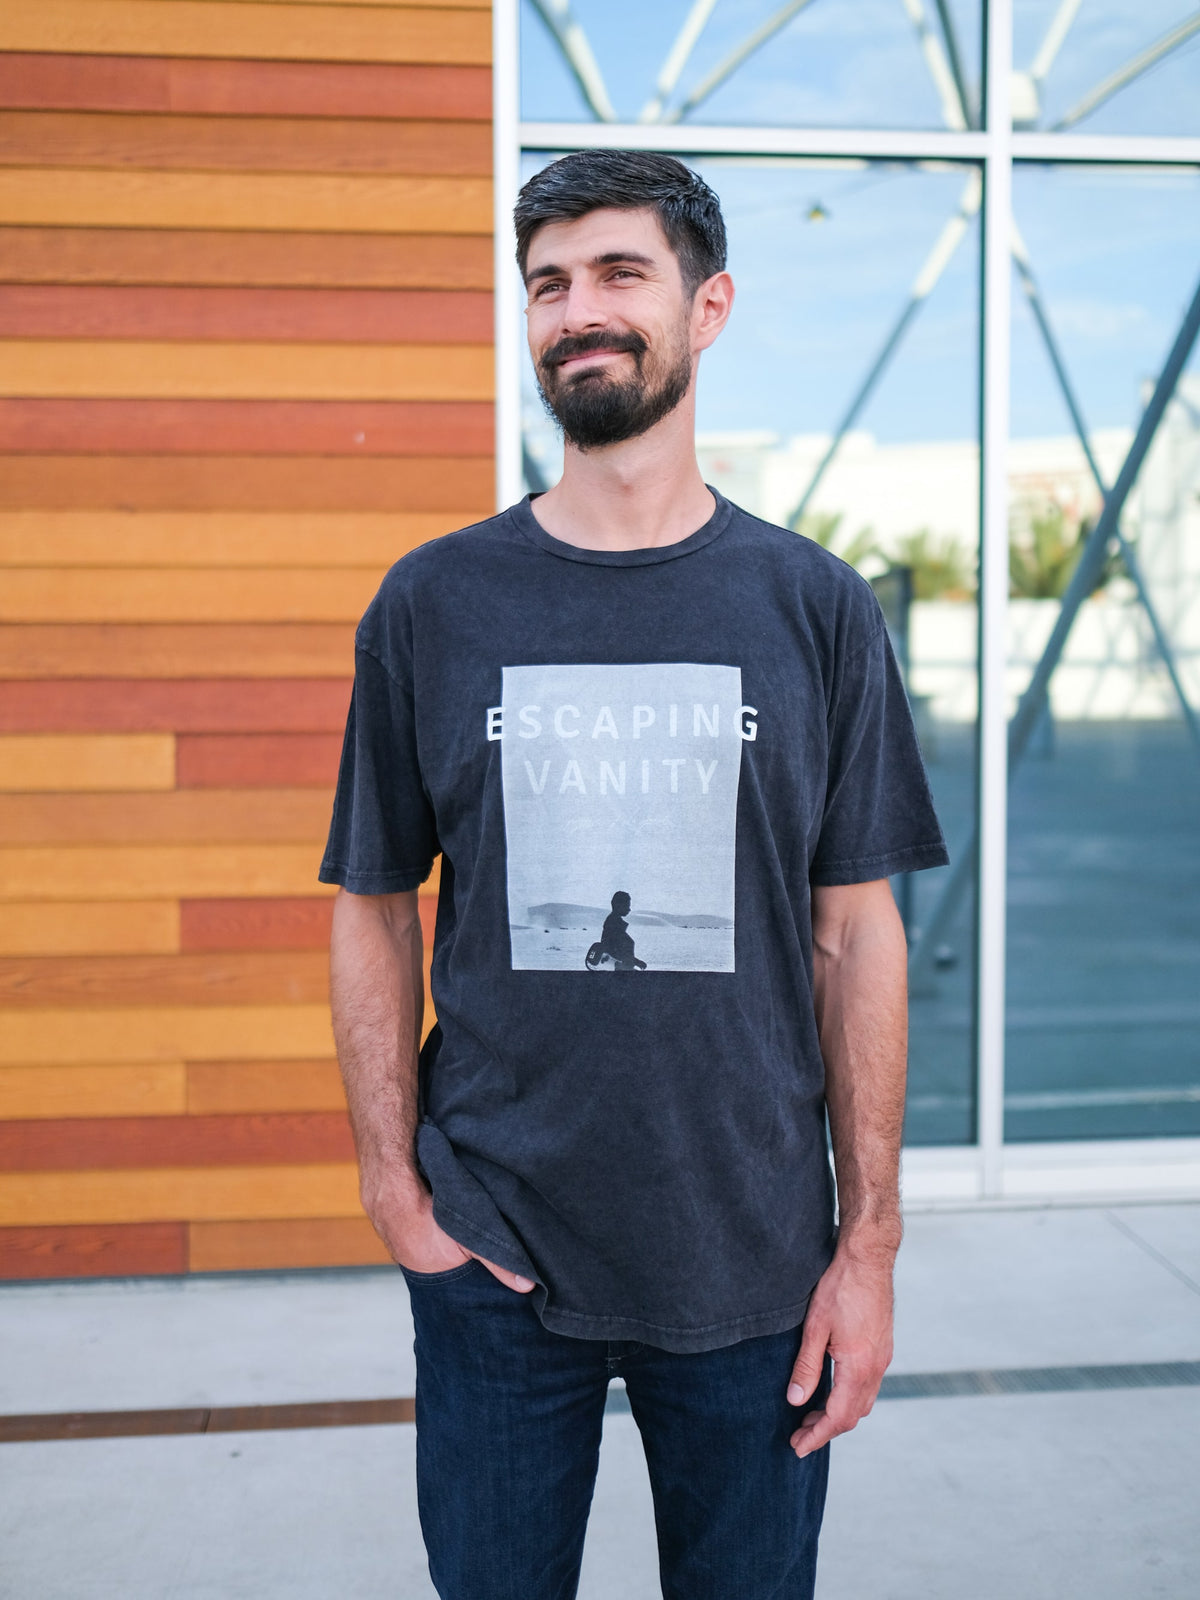 Christian Apparel - This "Band style Tee" is inspired by Ecclesiastes and the 'vanity of vanities' phrase repeated. We wanted to create a product that focuses on Escaping Vanity so we printed on this black washed tee those words along with a picture of a man walking in the dessert with his guitar.